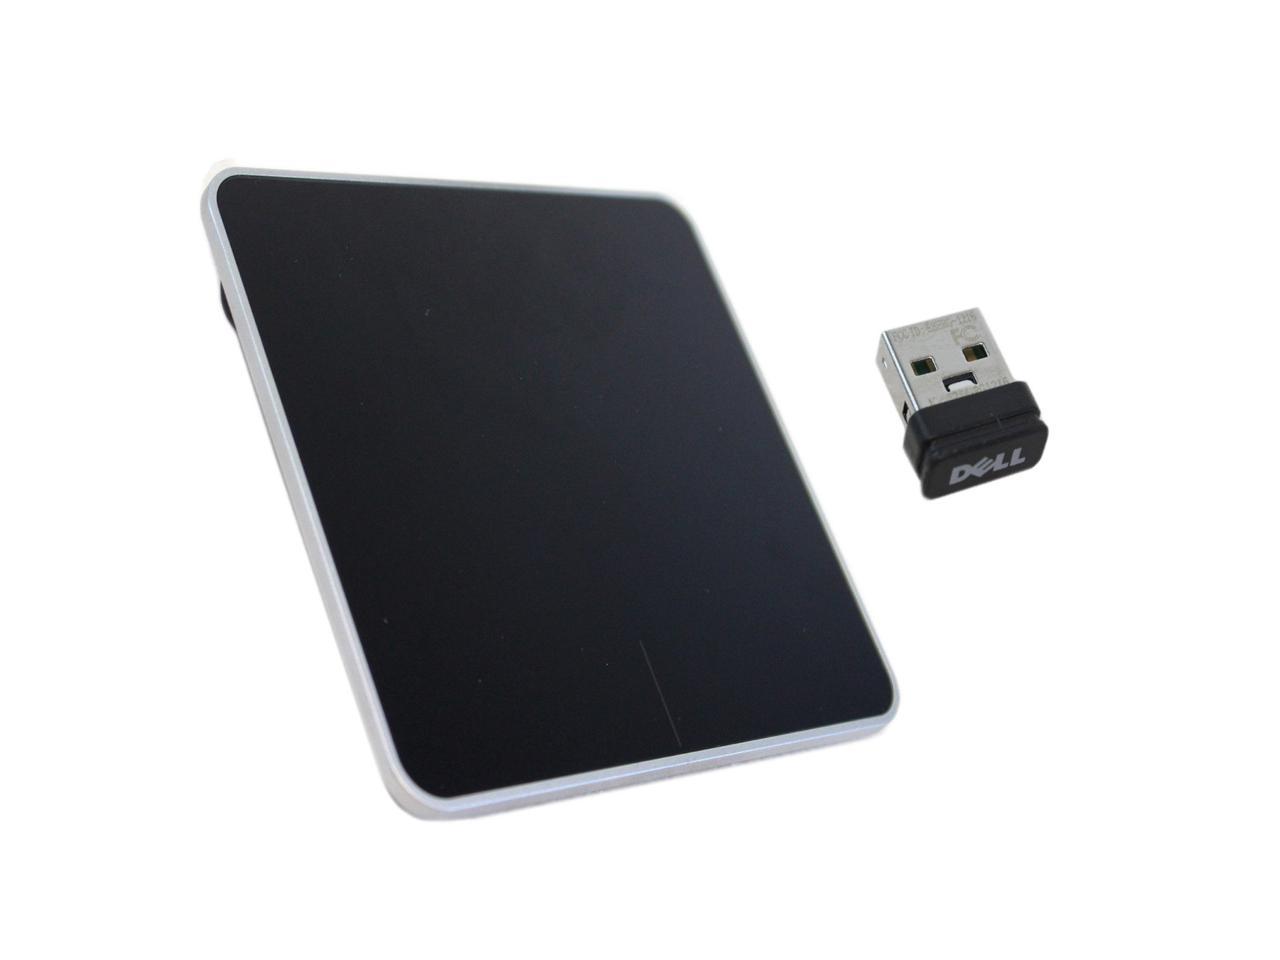 usb multitouch pad